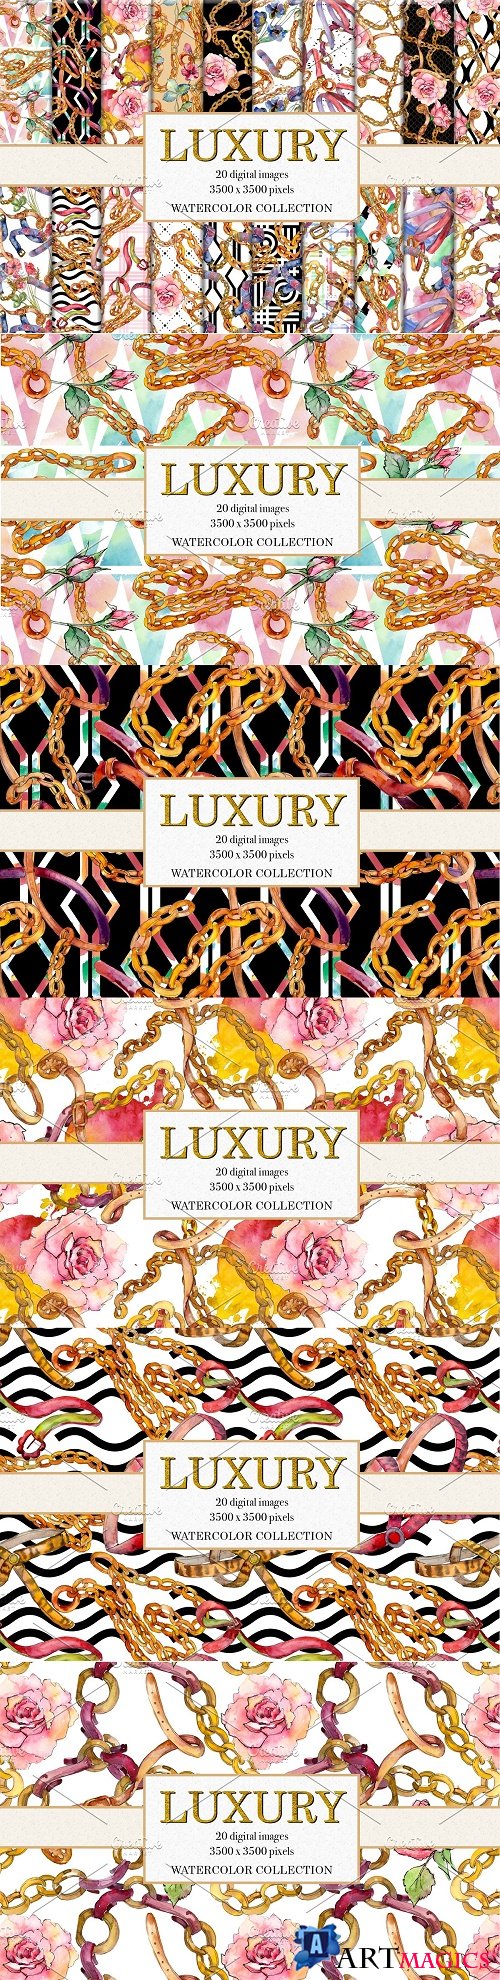 Luxury watercolor collection - 3839422